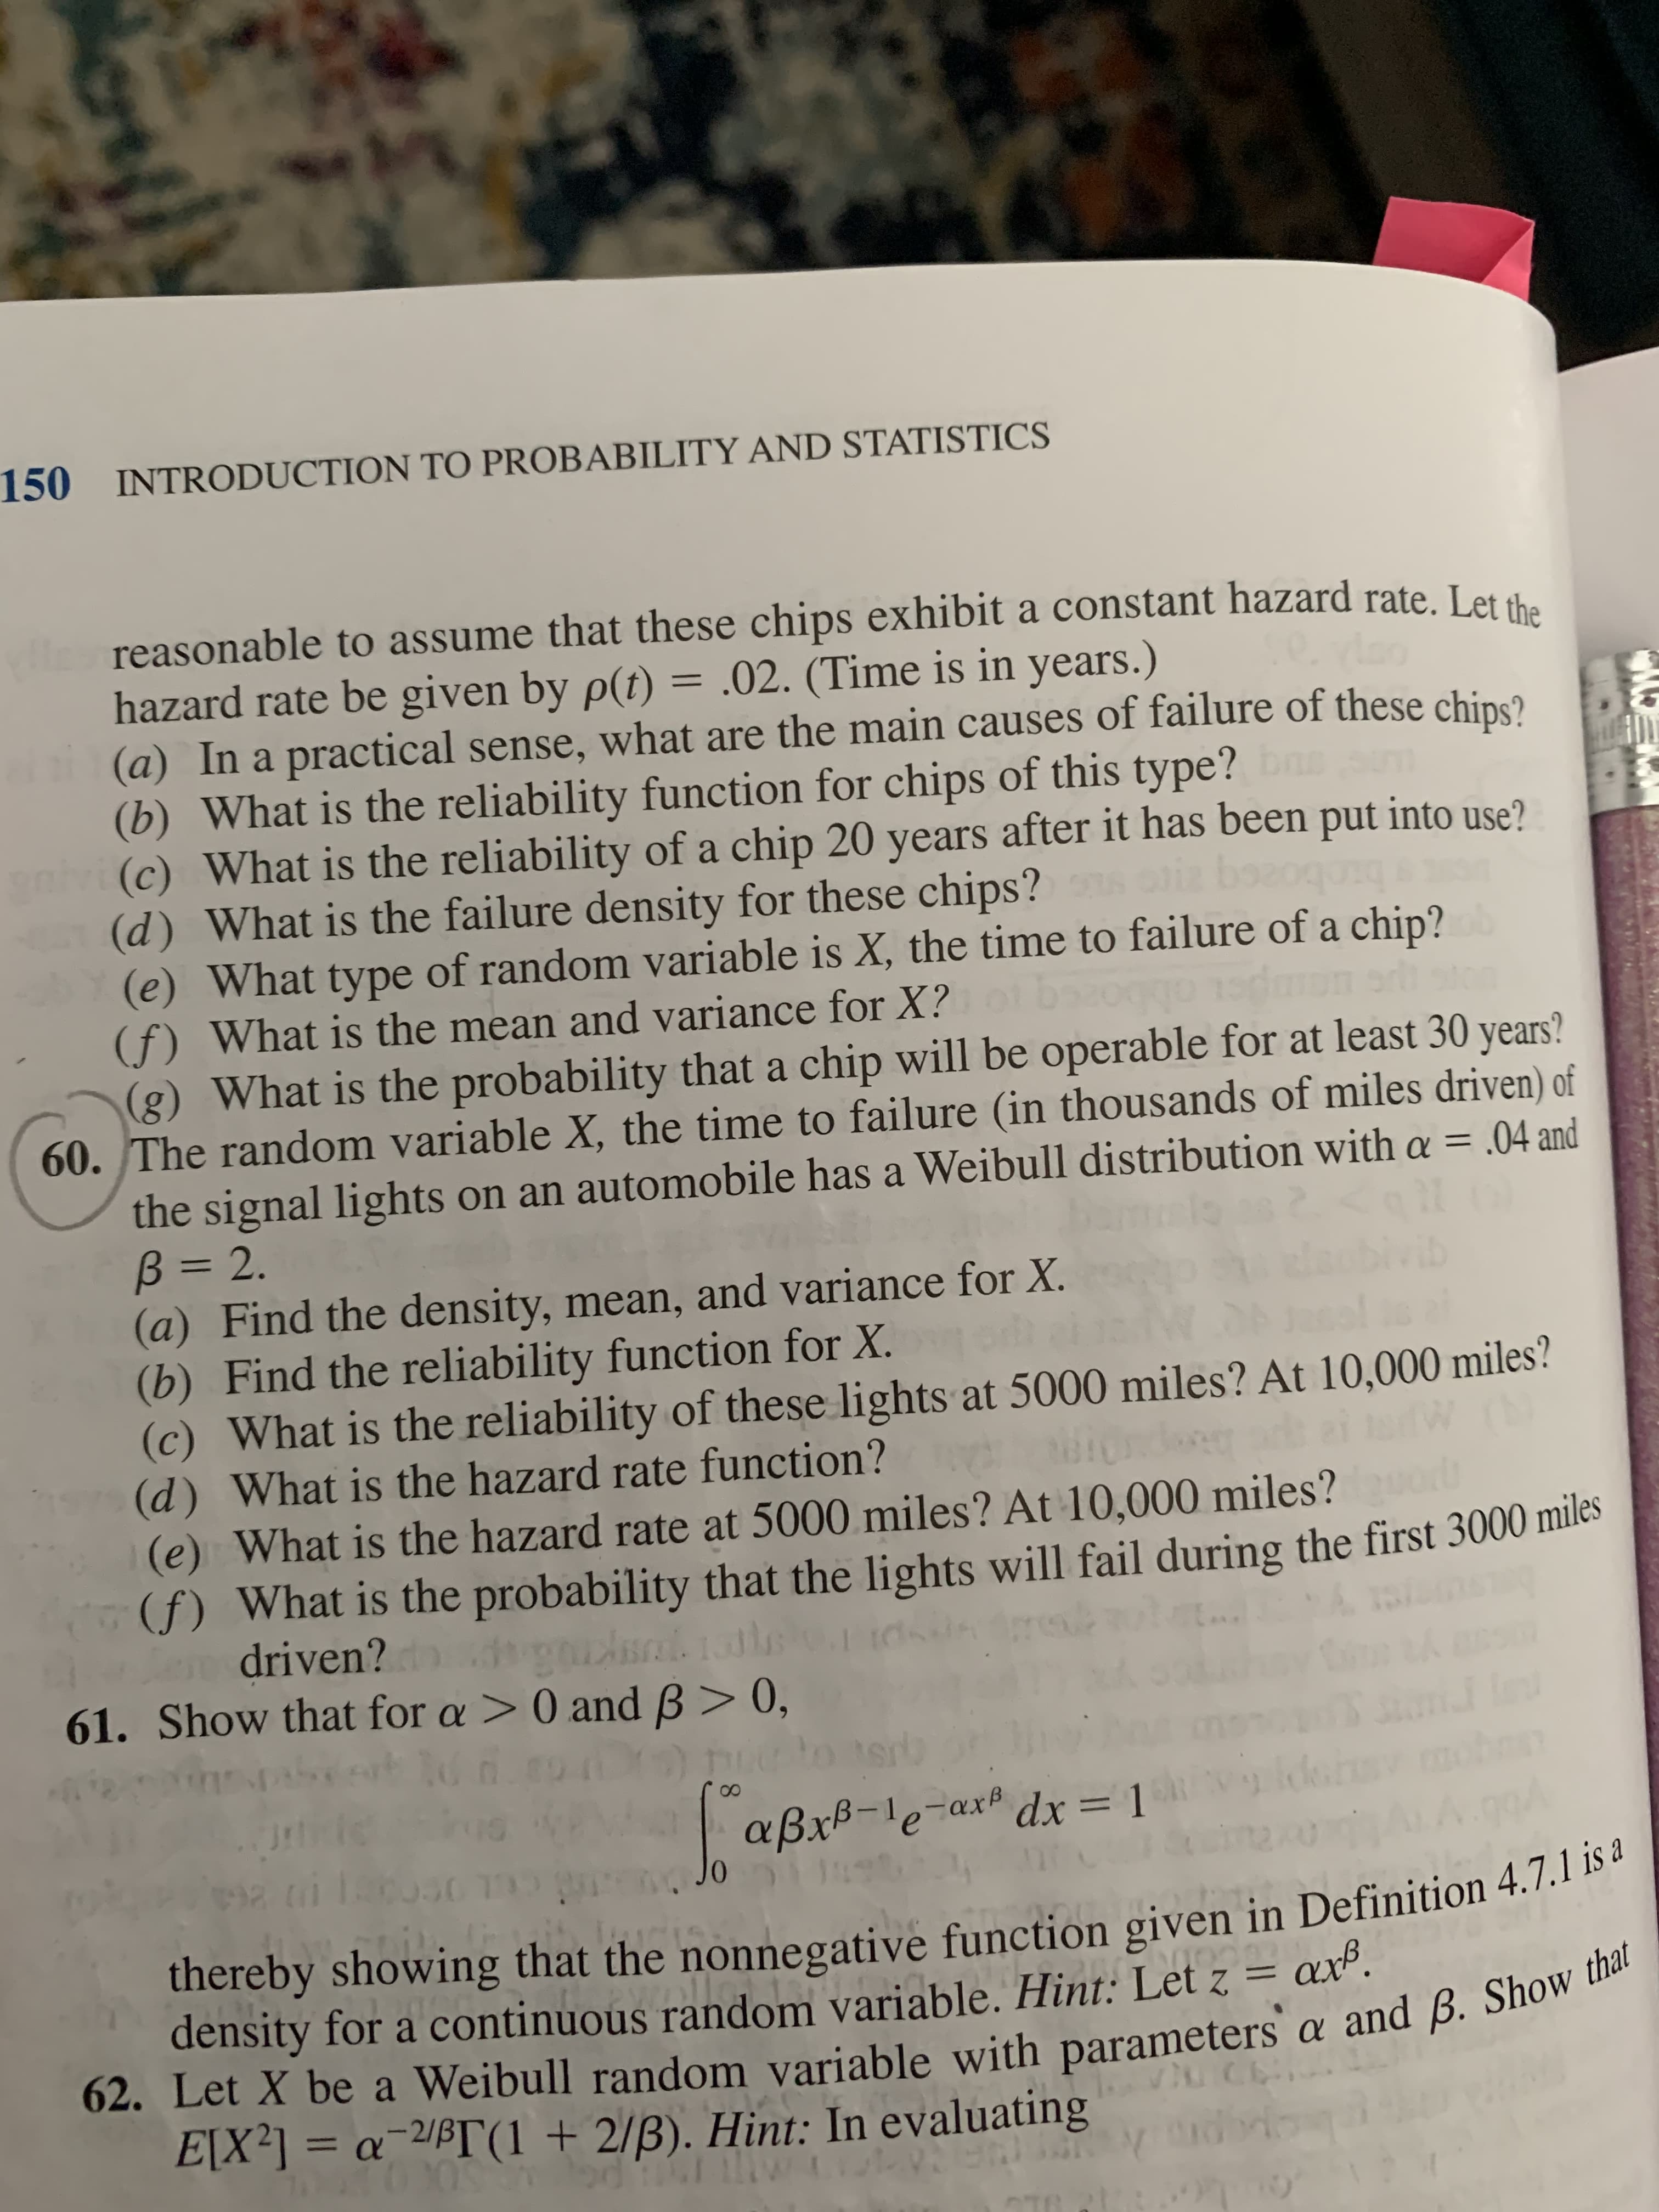 150 INTRODUCTION TO PROBABILITY AND STATISTICS
reasonable to assume that these chips exhibit a constant hazard rate. Let sh.
hazard rate be given by p(t) = .02. (Time is in years.)
(a) In a practical sense, what are the main causes of failure of these chins?
(b) What is the reliability function for chips of this type? bns
nv (c) What is the reliability of a chip 20 years after it has been put into use?
(d) What is the failure density for these chips?
(e) What type of random variable is X, the time to failure of a chip?
(f) What is the mean and variance for X?
(g) What is the probability that a chip will be operable for at least 30 years?
60. The random variable X, the time to failure (in thousands of miles driven) of
bozogang
the signal lights on an automobile has a Weibull distribution with a = .04 and
B = 2.
(a) Find the density, mean, and variance for X.
(b) Find the reliability function for X.
(c) What is the reliability of these lights at 5000 miles? At 10,000 miles?
(d) What is the hazard rate function?
(e) What is the hazard rate at 5000 miles? At 10,000 miles?
(f) What is the probability that the lights will fail during the first 3000 miles
driven? tal1ls
61. Show that for a > 0 and B> 0,
vib
aßxB-le-ax dx = 1
%3D
01
thereby showing that the nonnegative function given in Definition 4.7.1 is a
density for a continuous random variable. Hint: Let z = axº.
62. Let X be a Weibull random variable with parameters a and ß. Show that
E[X²] = a¯2/ß[T(1 + 2/B). Hint: In evaluating
%3D
